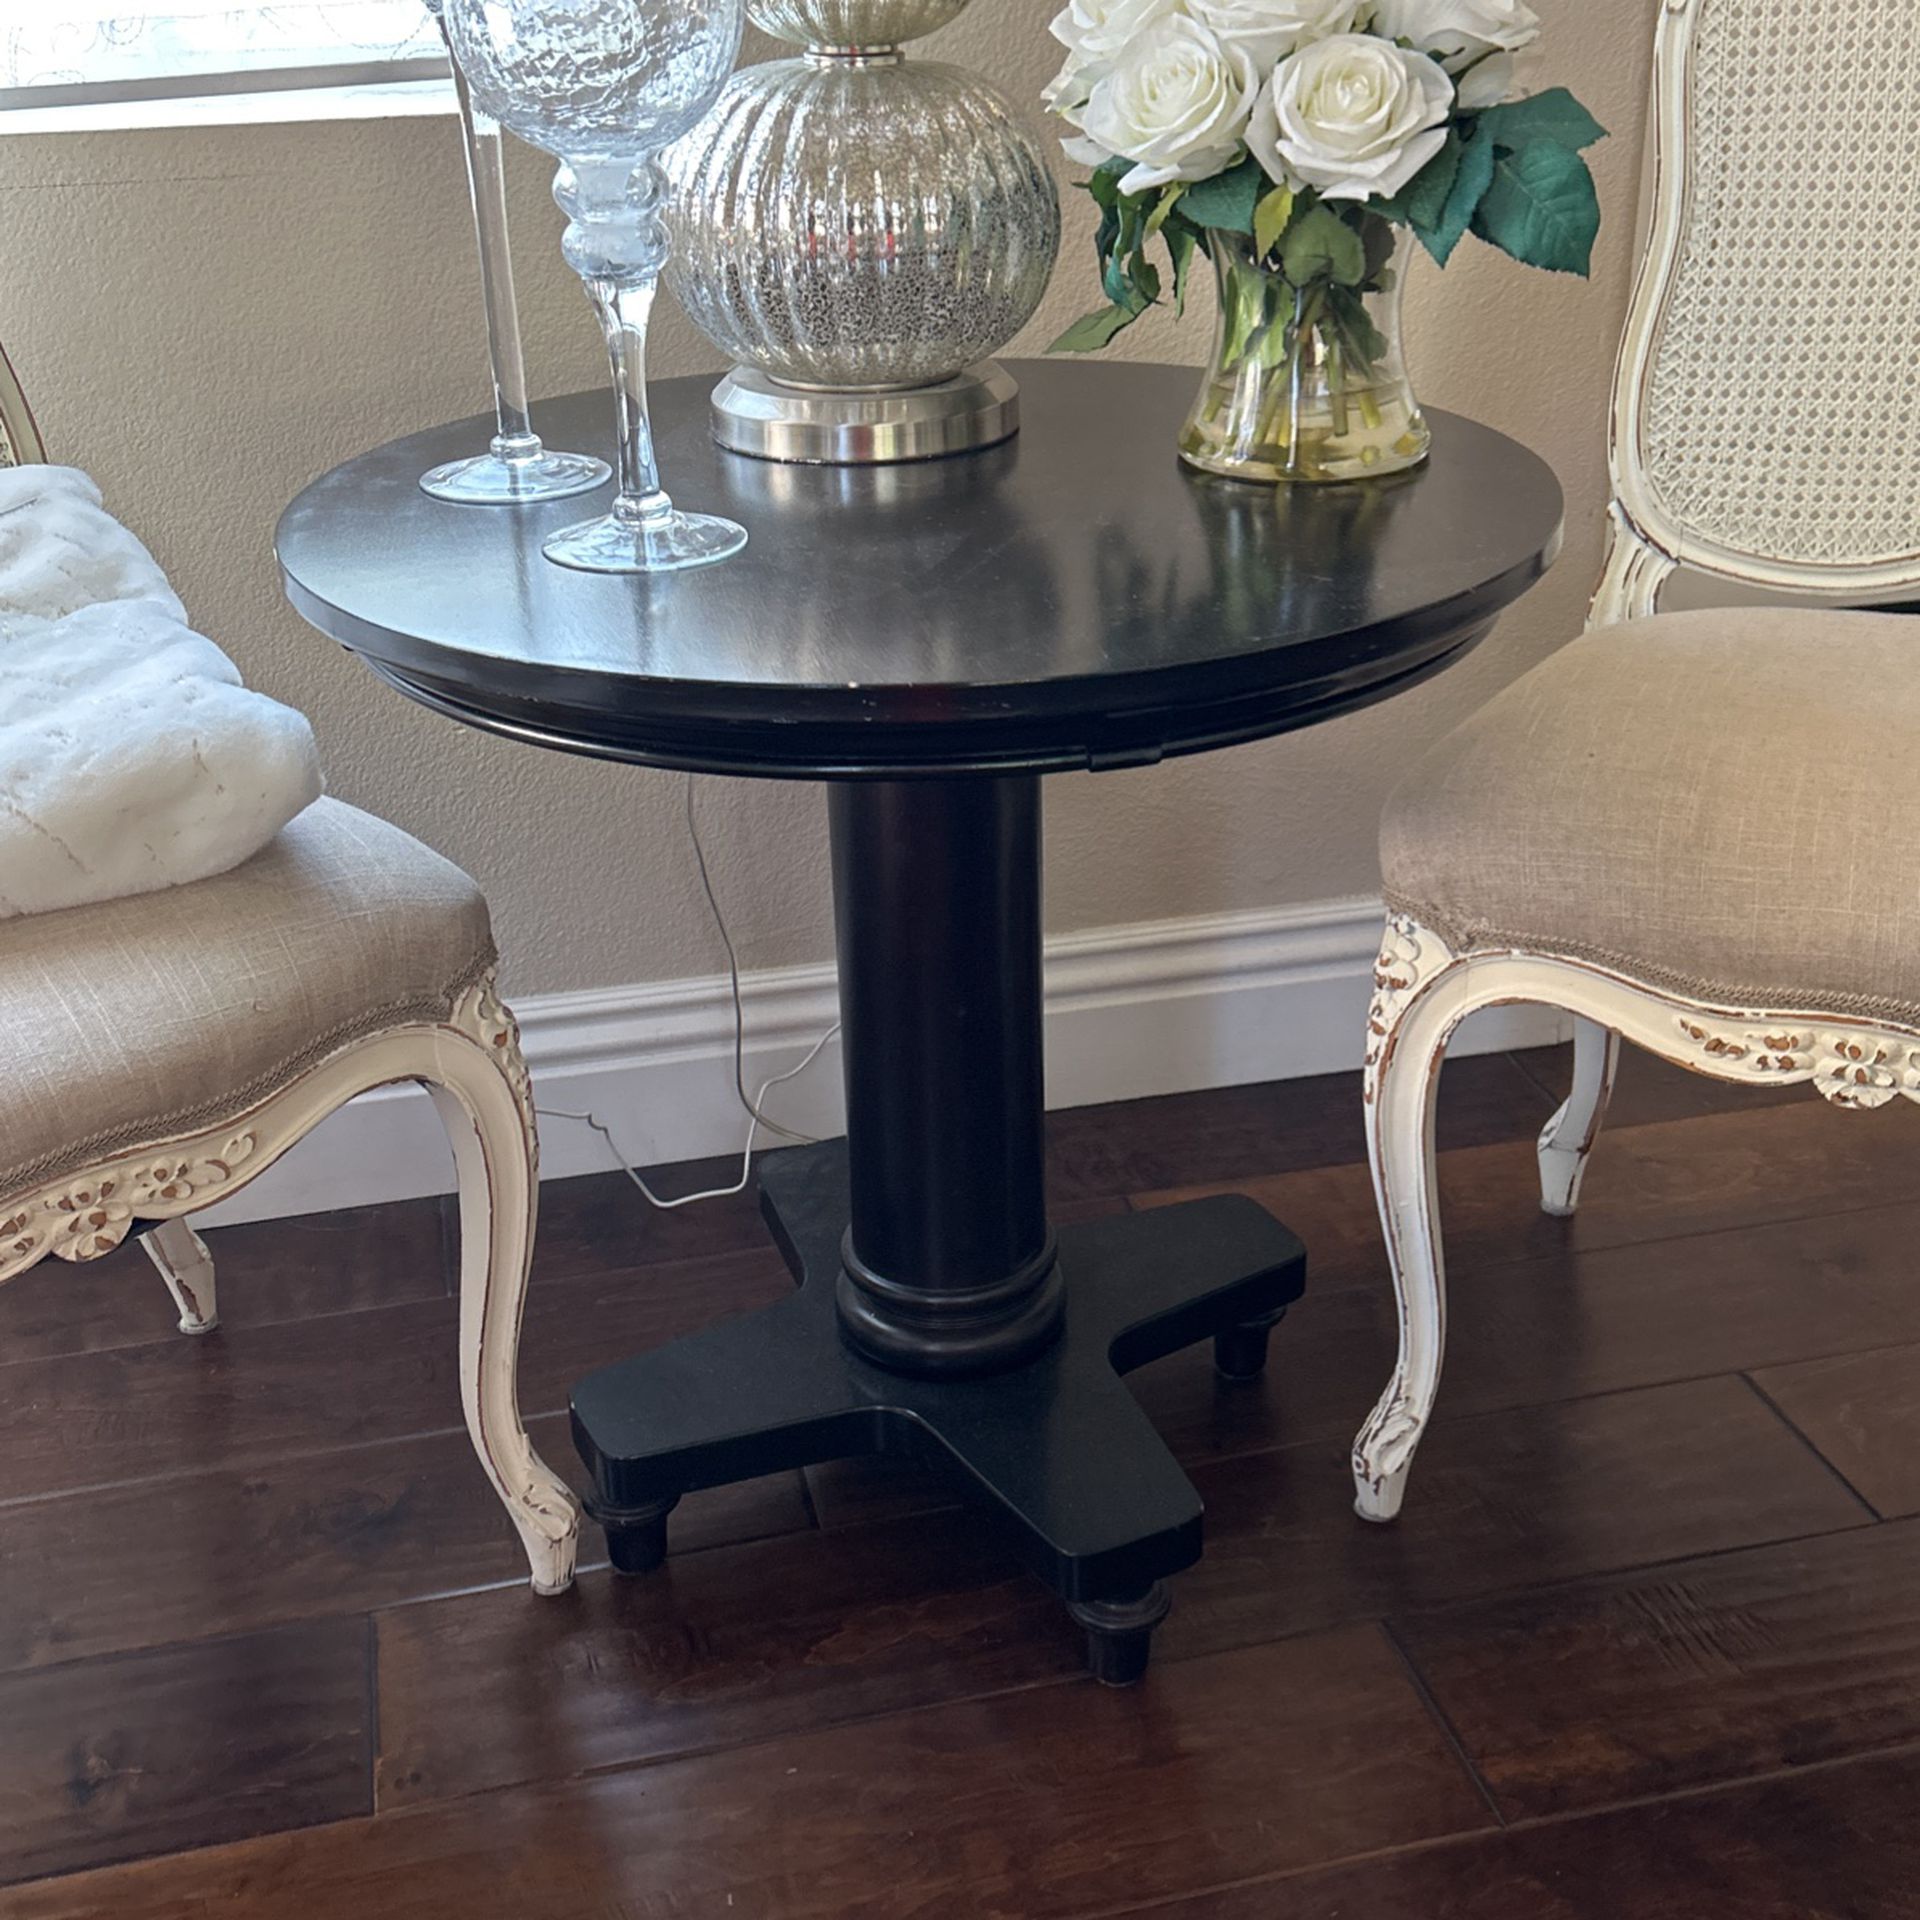 2 Chocolate Brown End Tables 